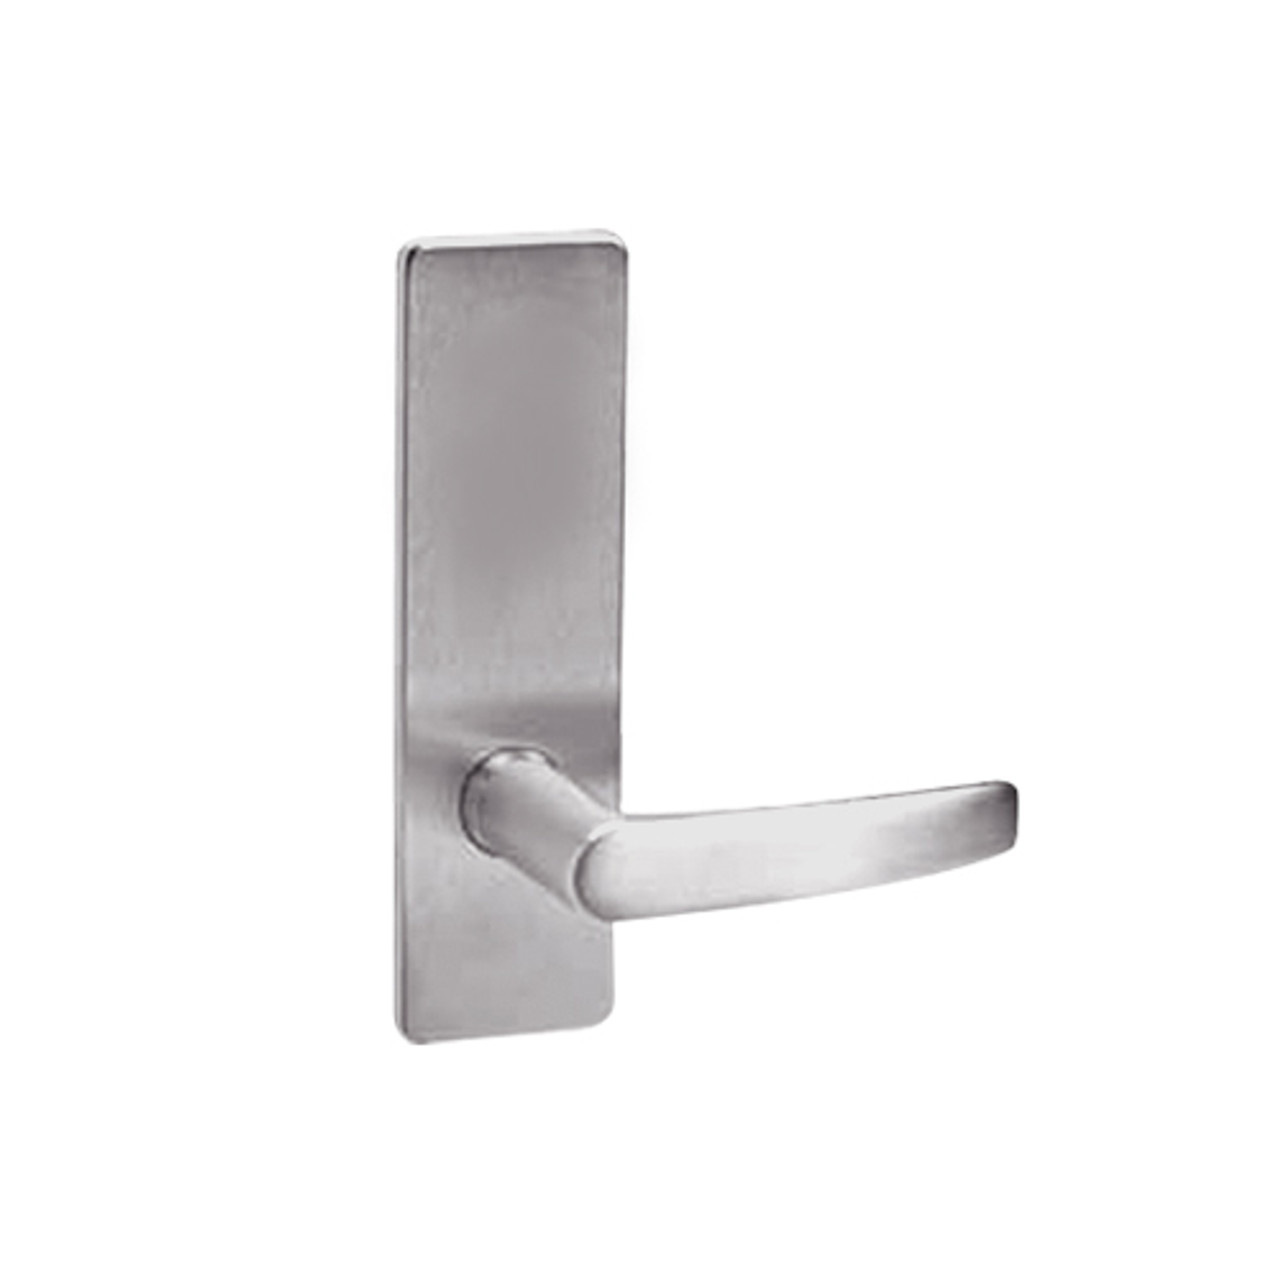 ML2030-ASP-630 Corbin Russwin ML2000 Series Mortise Privacy Locksets with Armstrong Lever in Satin Stainless